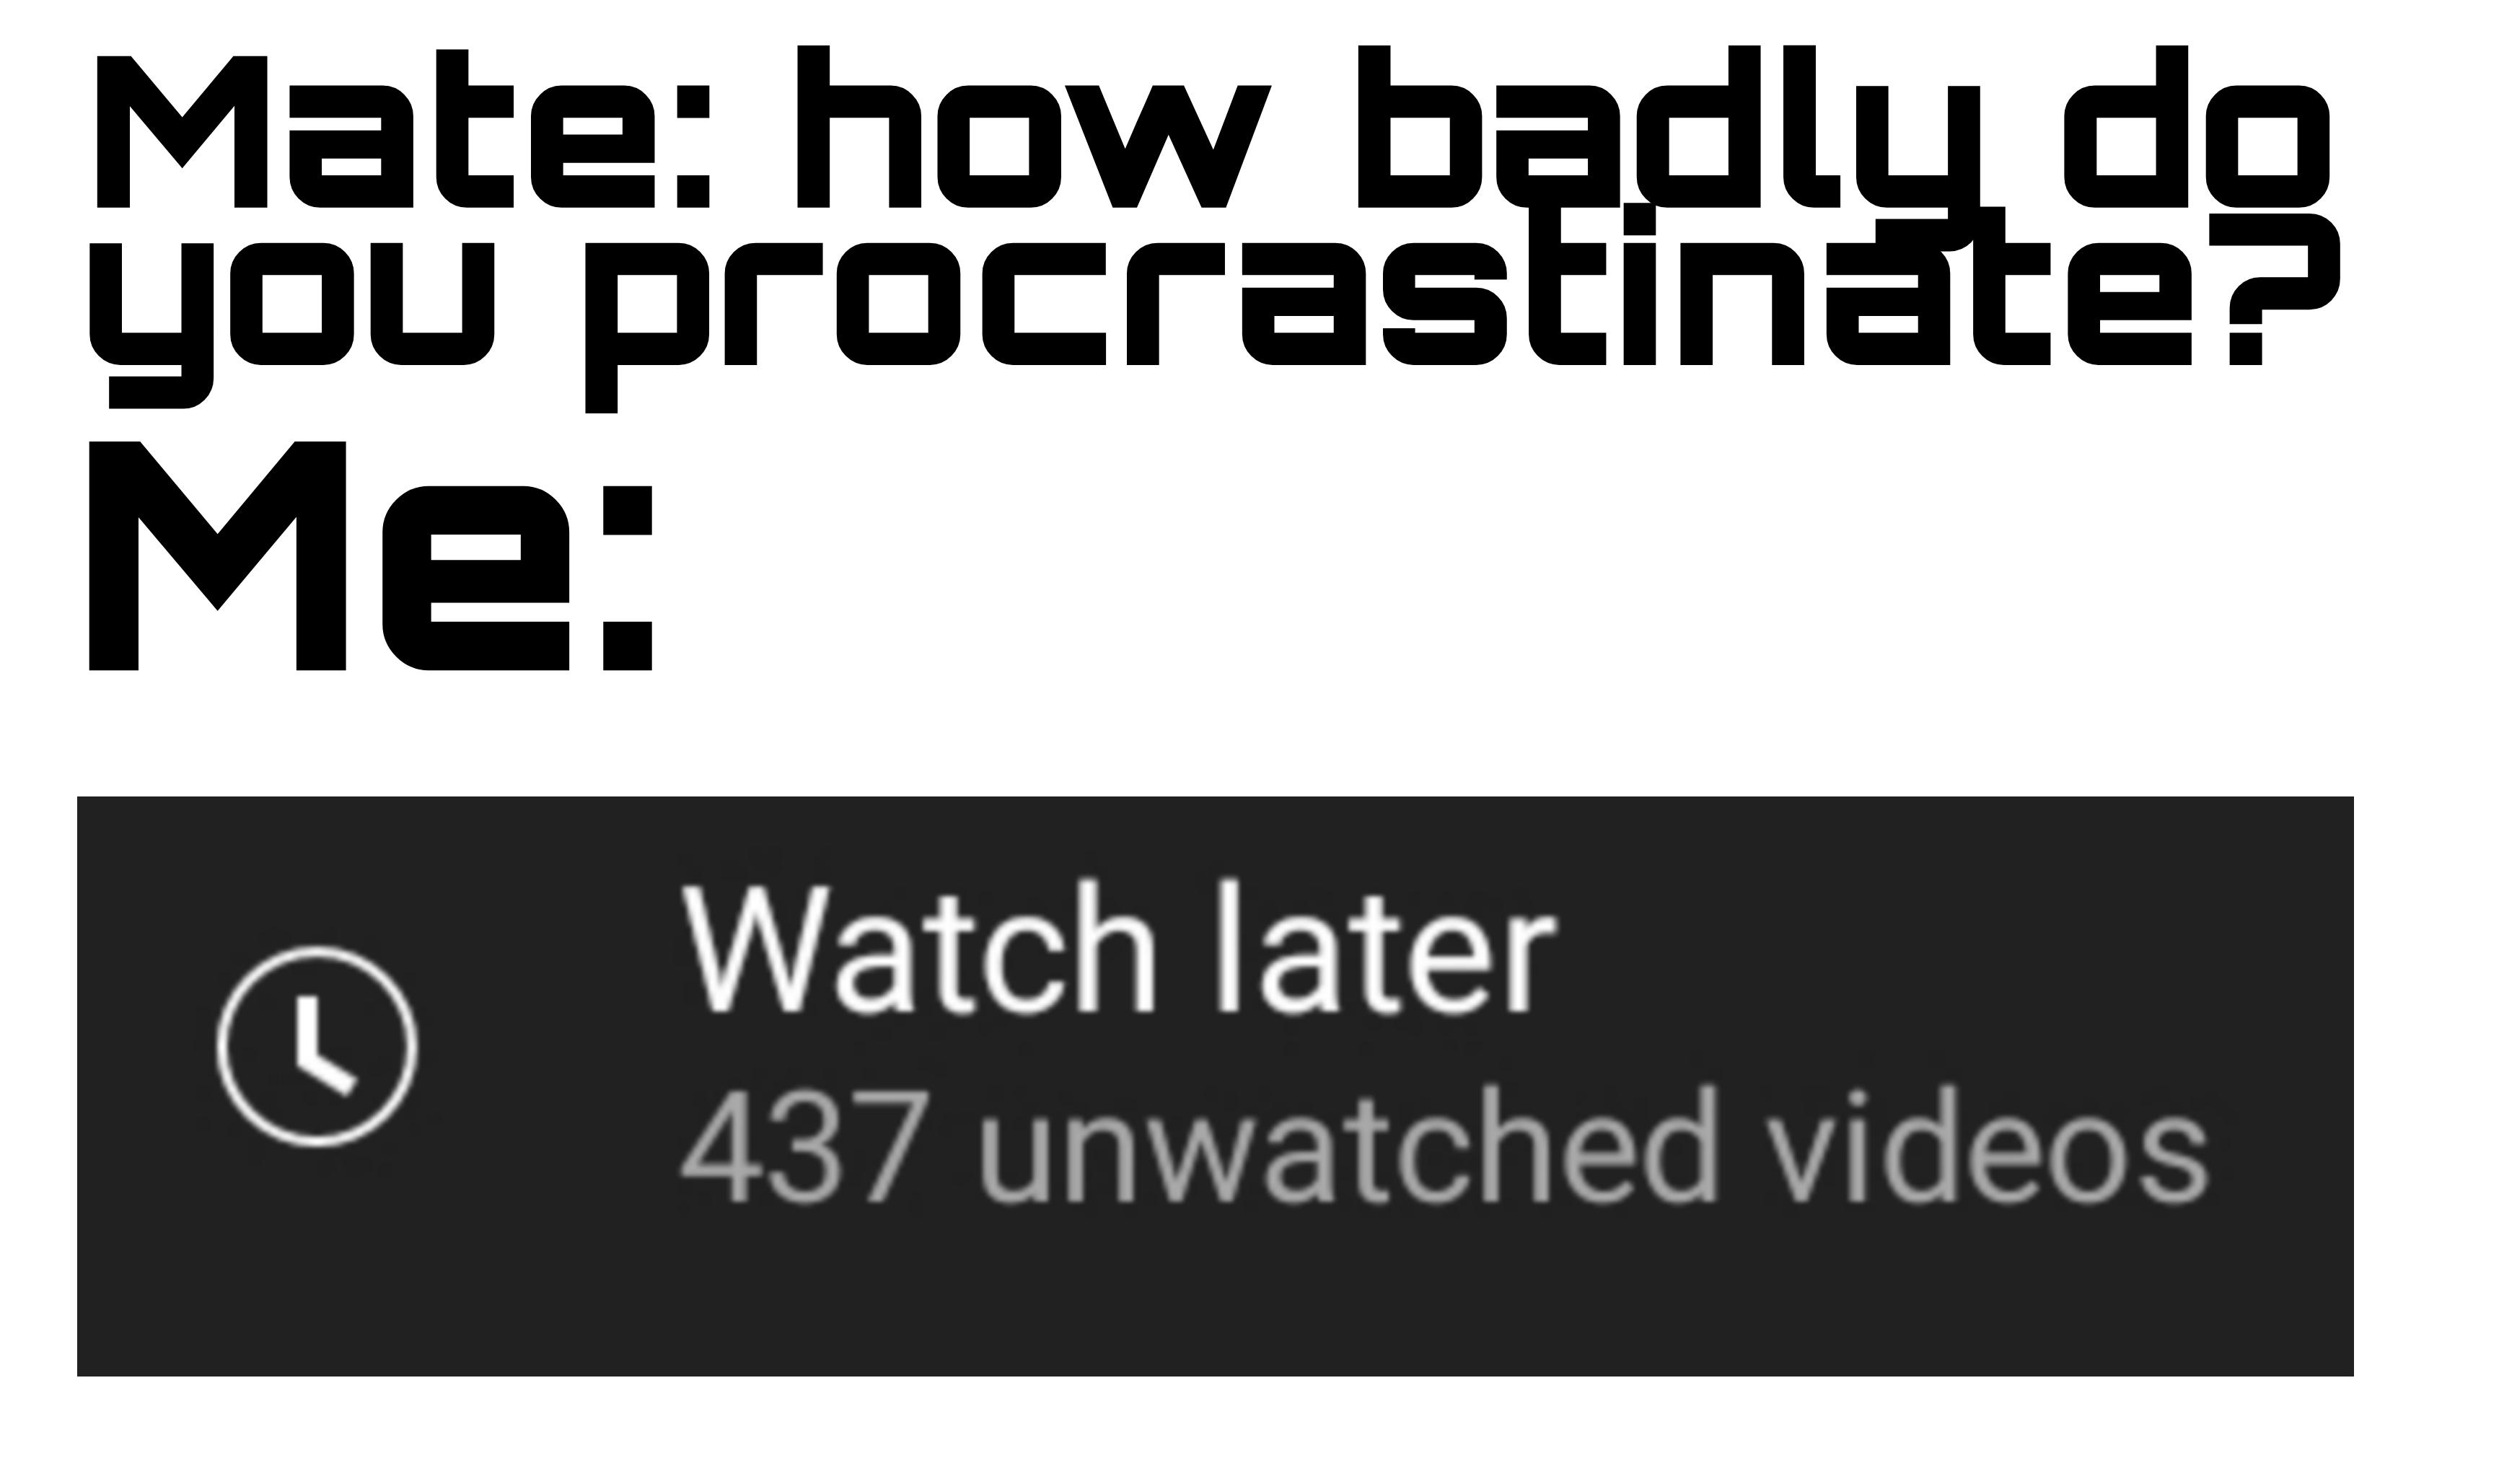 funny gaming memes - cats in the cradle lyrics - Mate how badlu do you procrastinate? Me 0 Watch later 437 unwatched videos